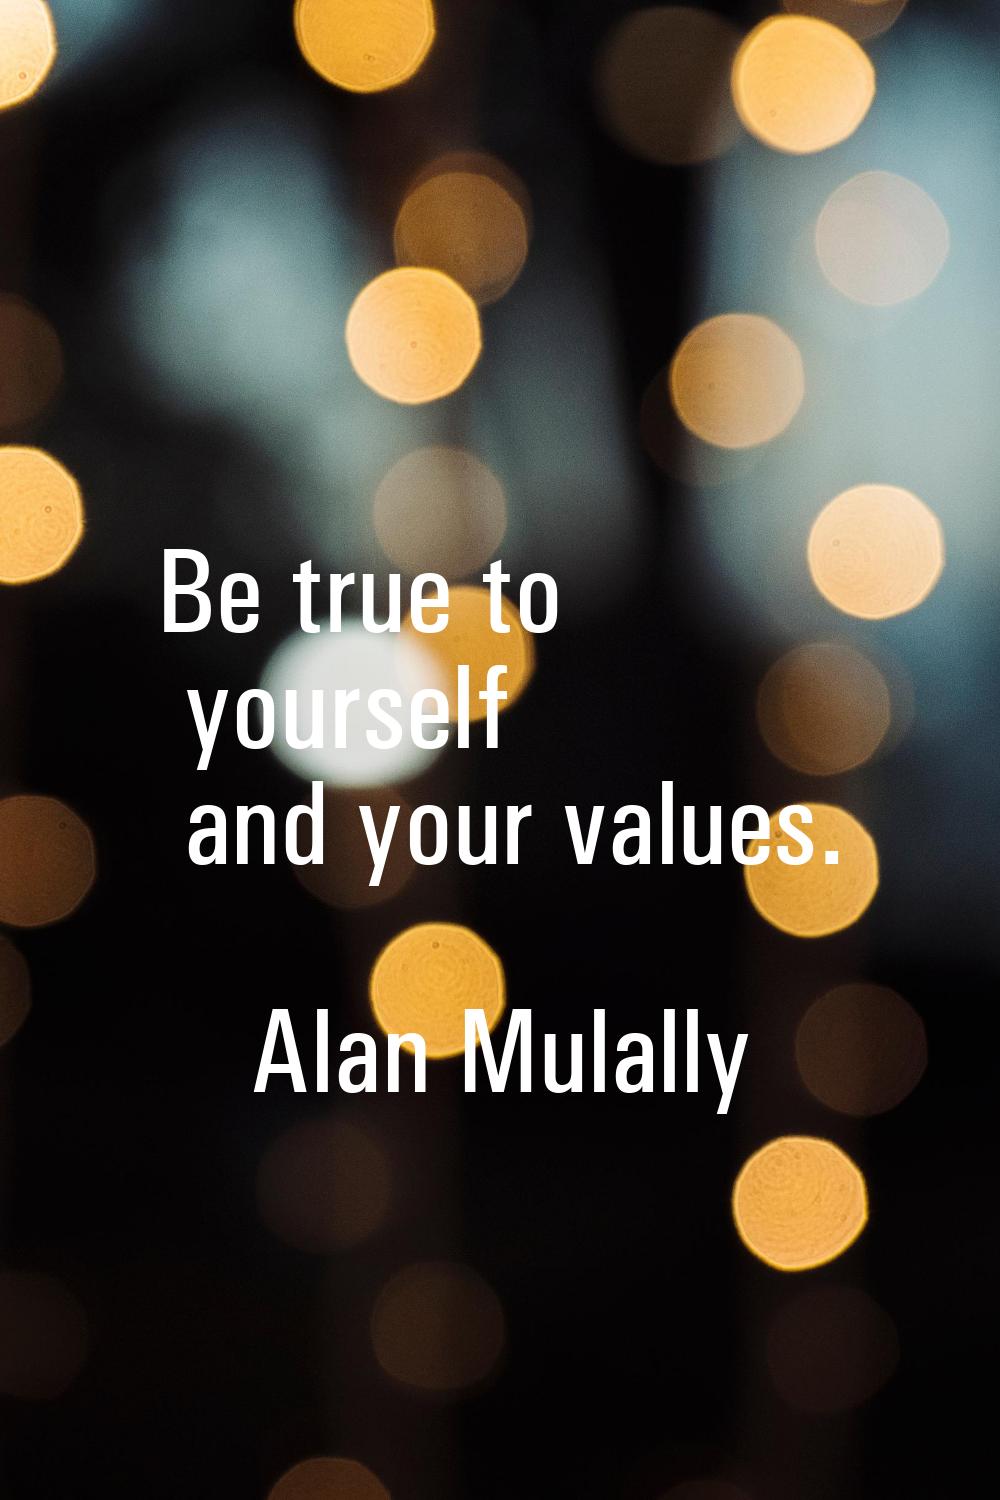 Be true to yourself and your values.